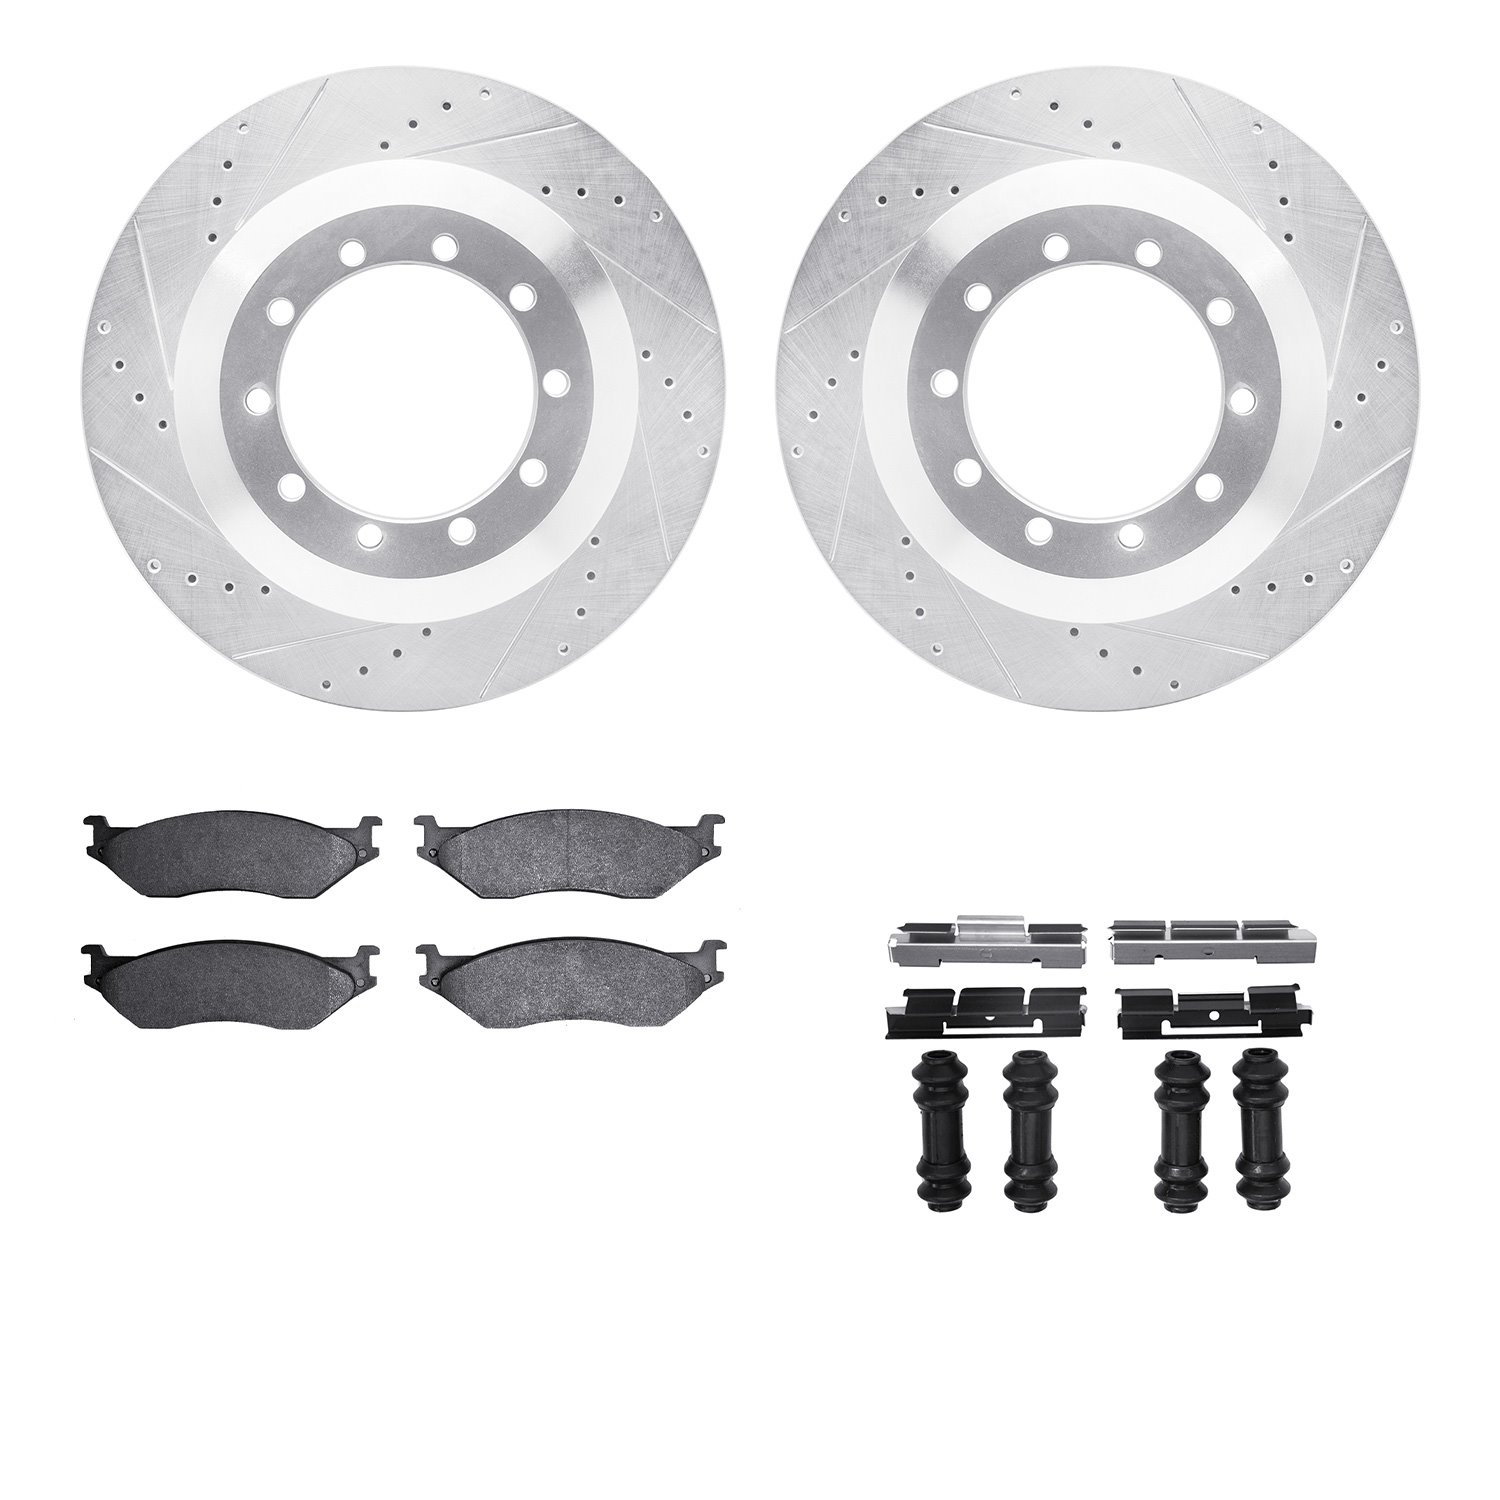 7412-54045 Drilled/Slotted Brake Rotors with Ultimate-Duty Brake Pads Kit & Hardware [Silver], 1999-2004 Ford/Lincoln/Mercury/Ma